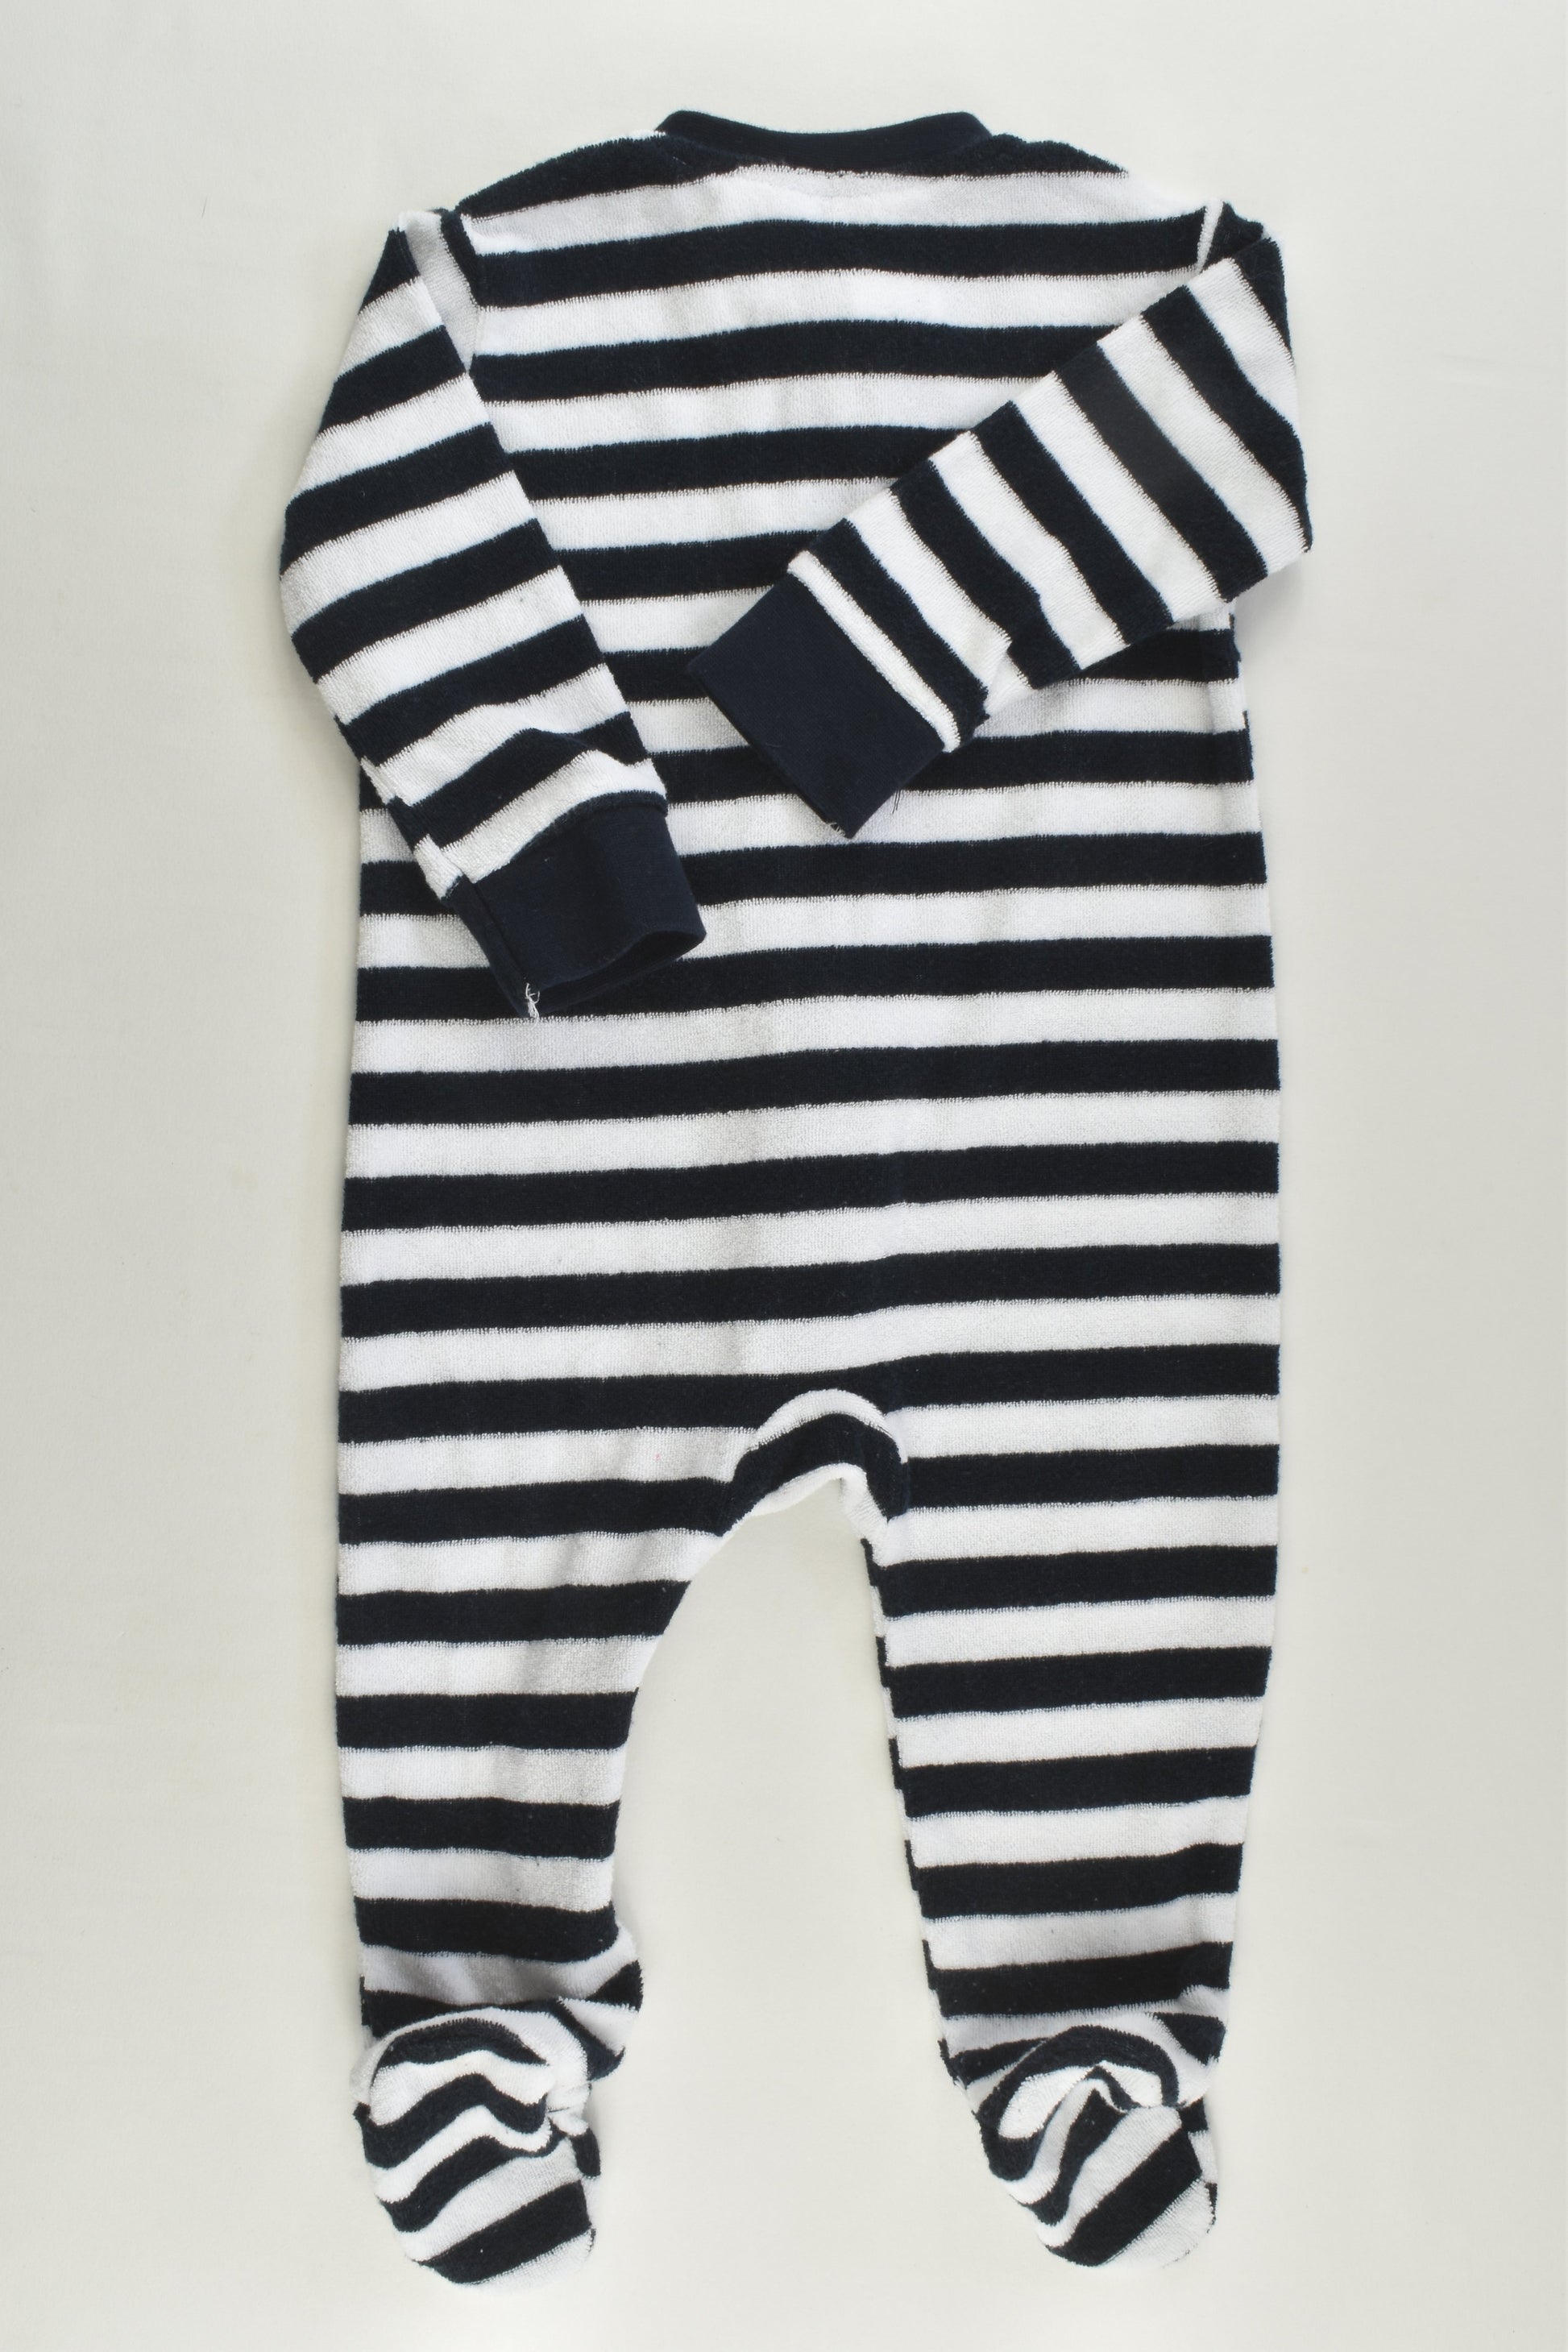 Kids & Co Size 00 Footed Striped Elephant Terry Romper